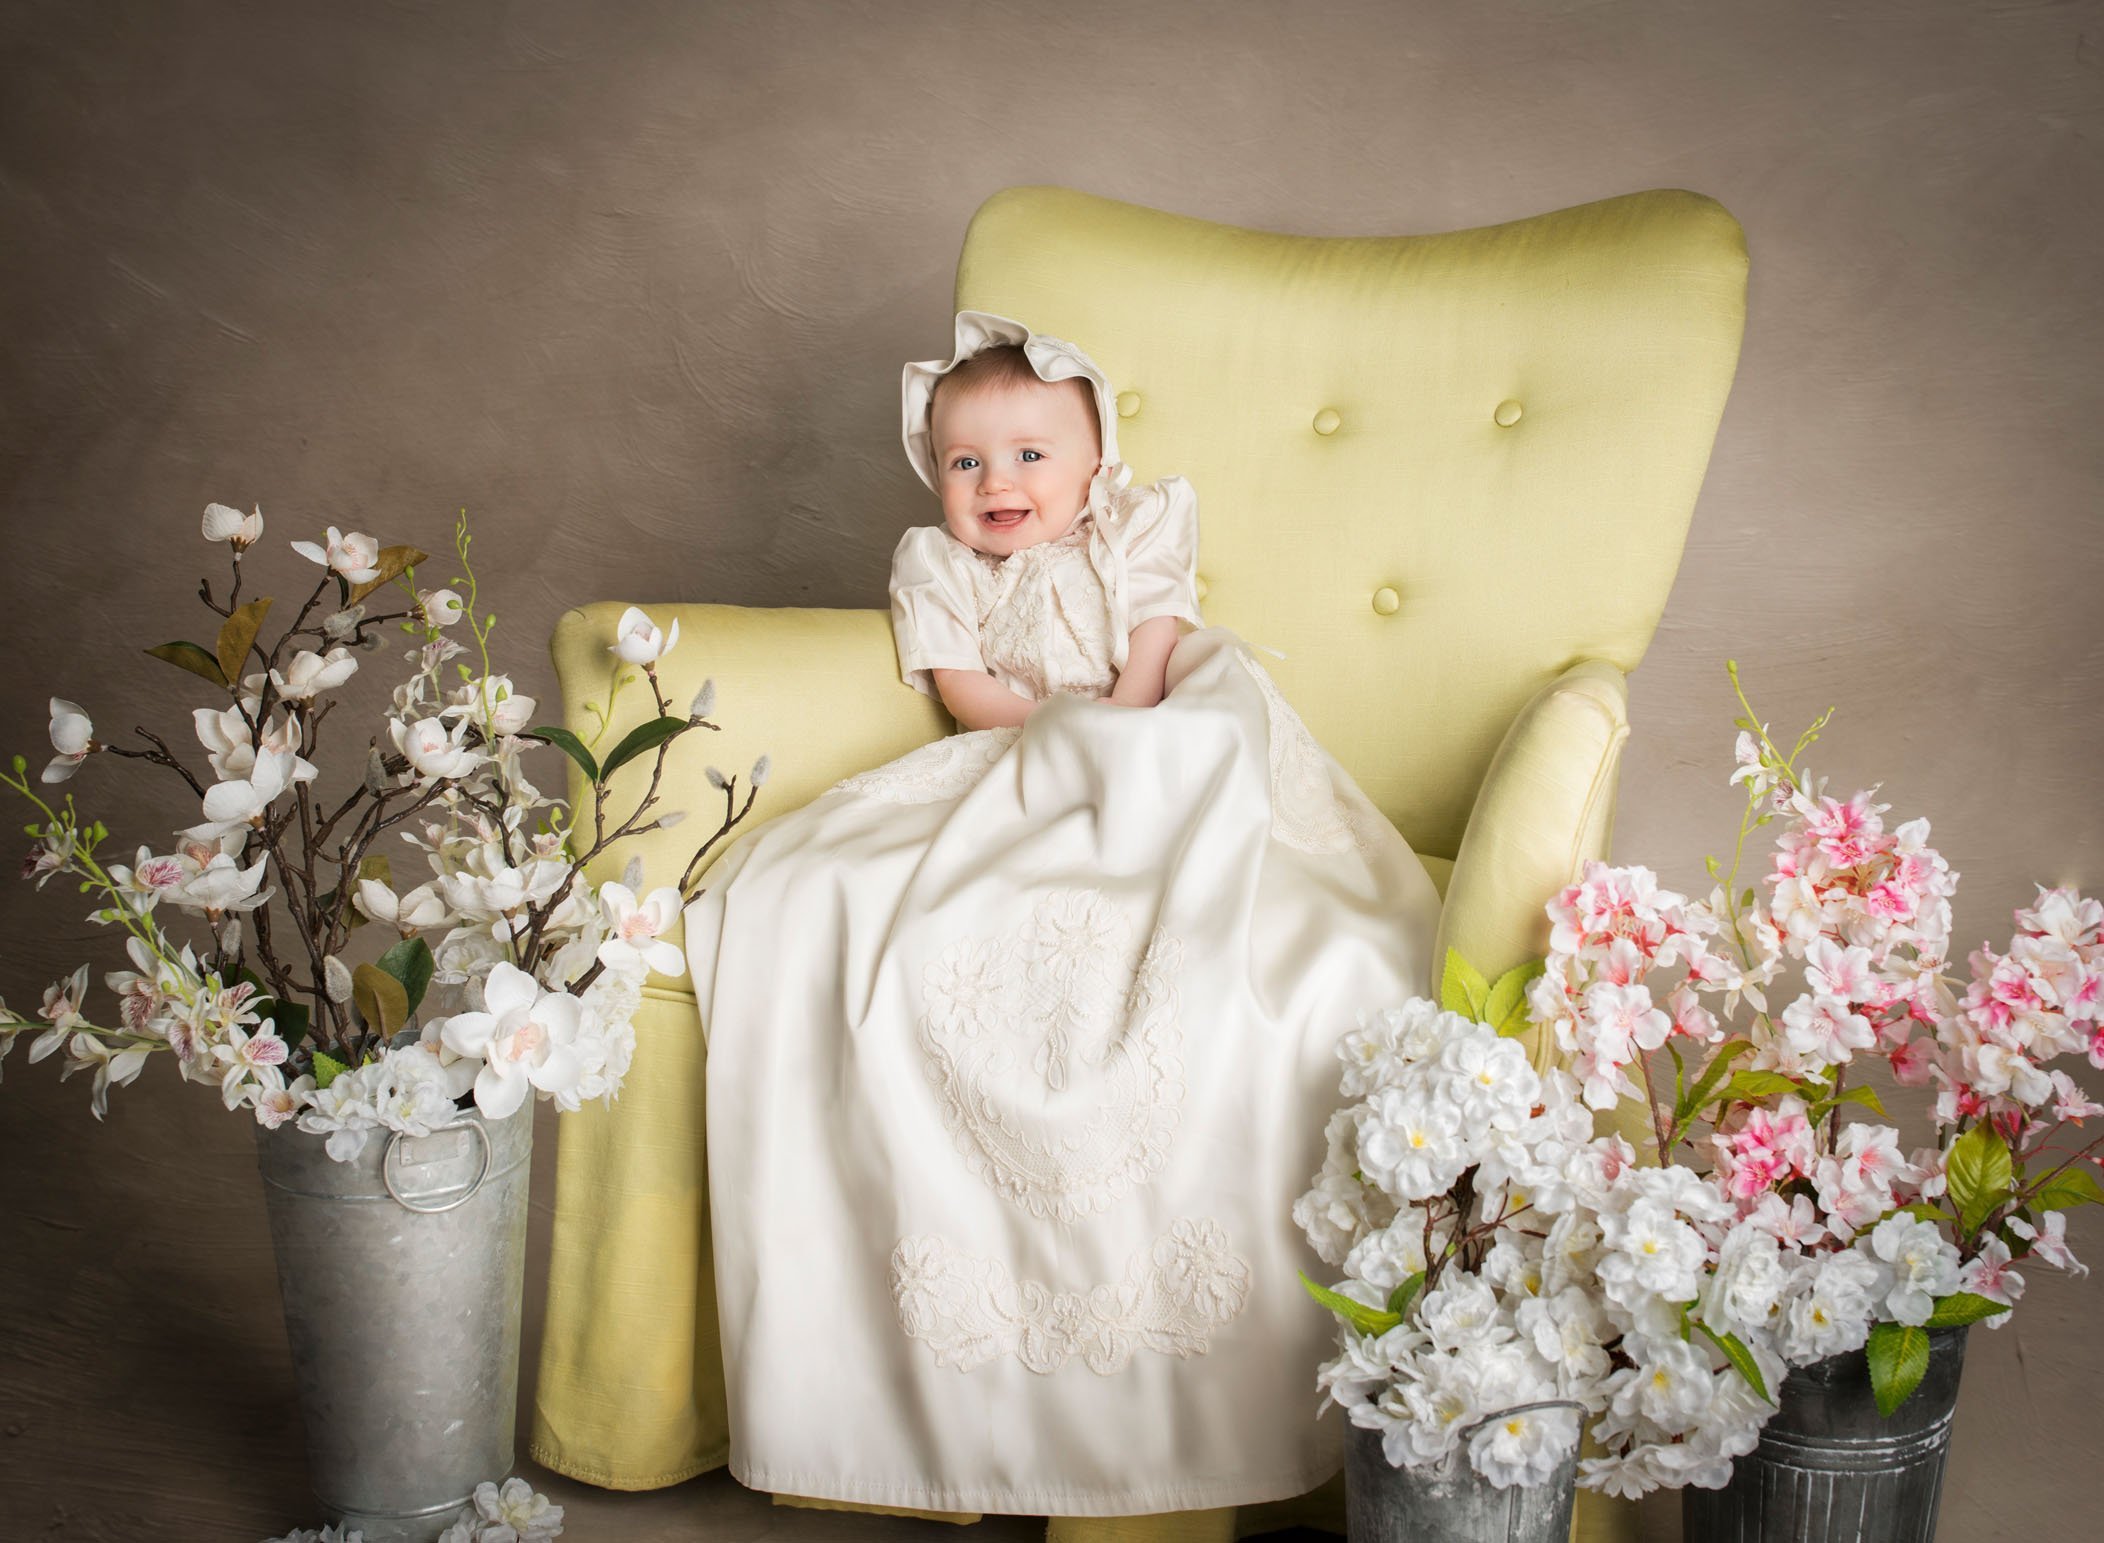 6 mo old baby girl sitting in a chair surrounded by flowers dressed in her fancy Christening gown